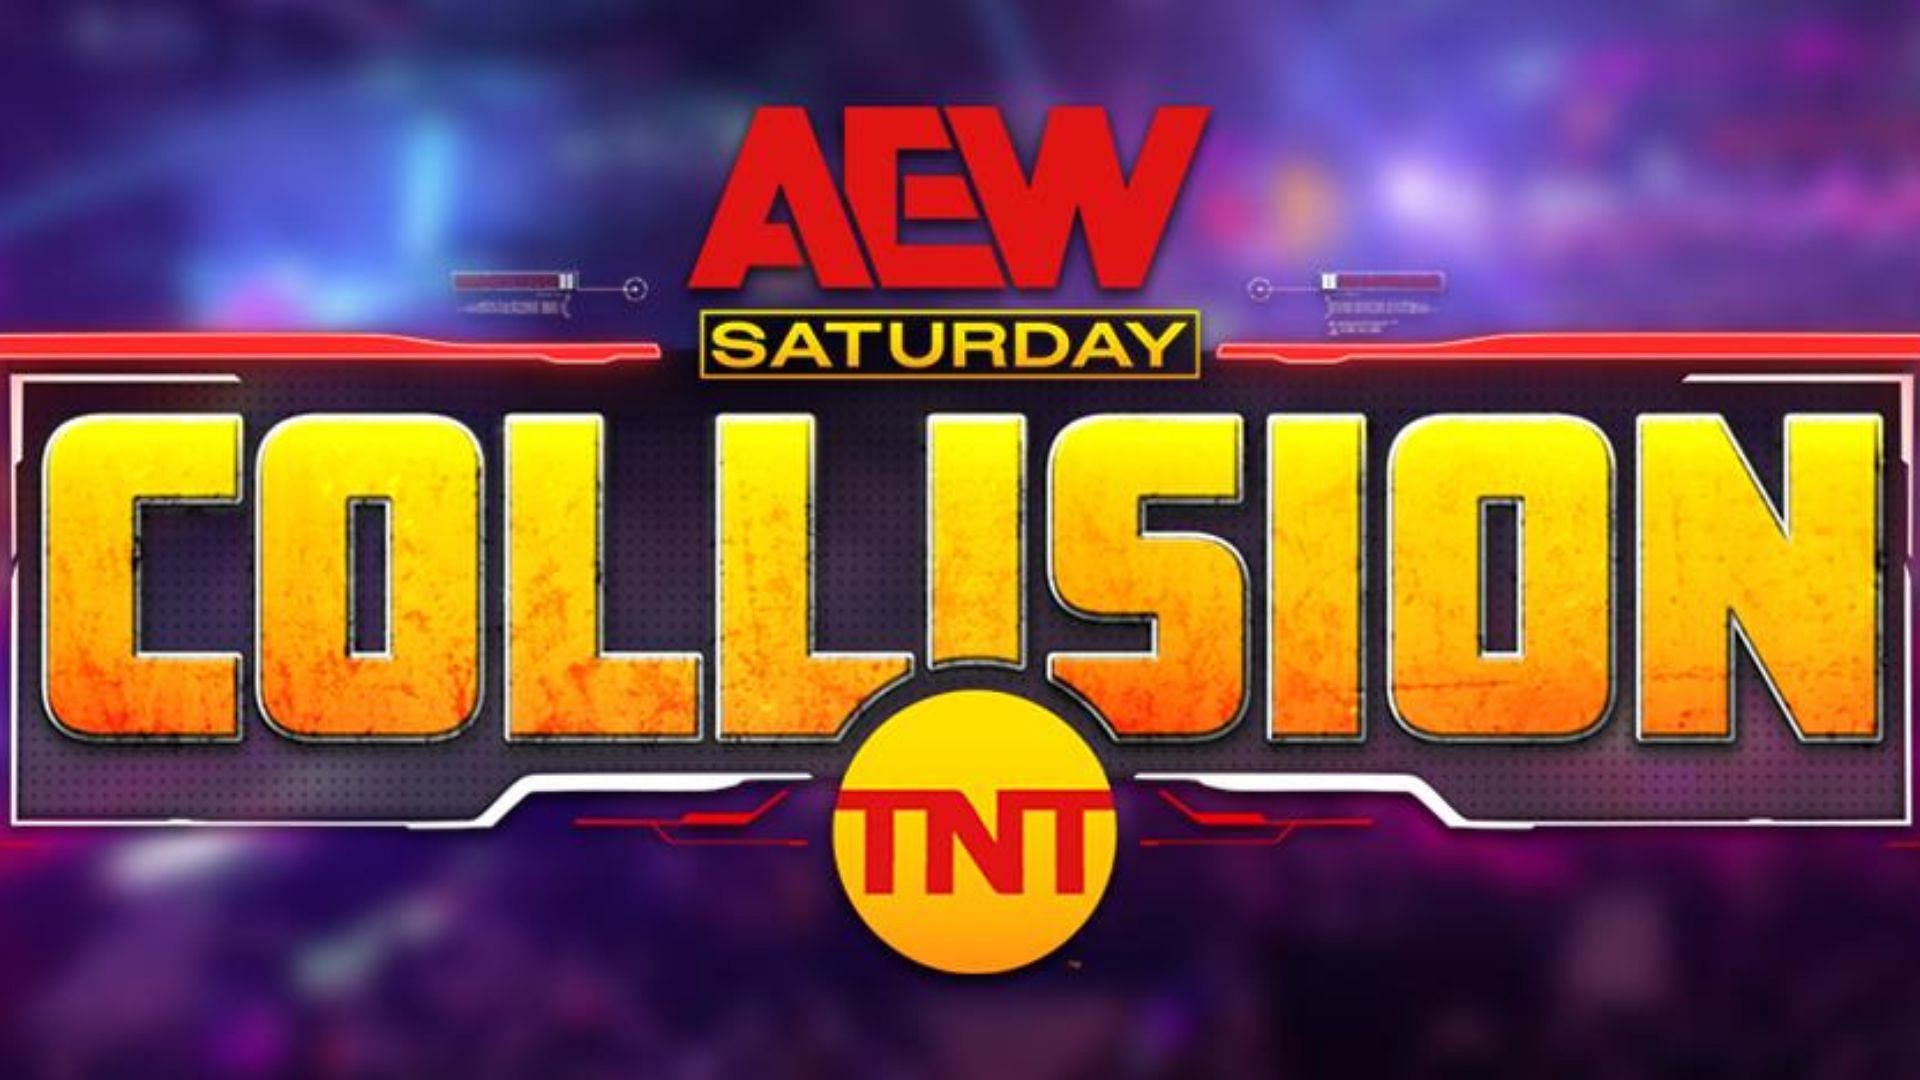 AEW Collision is set debut on this weekend